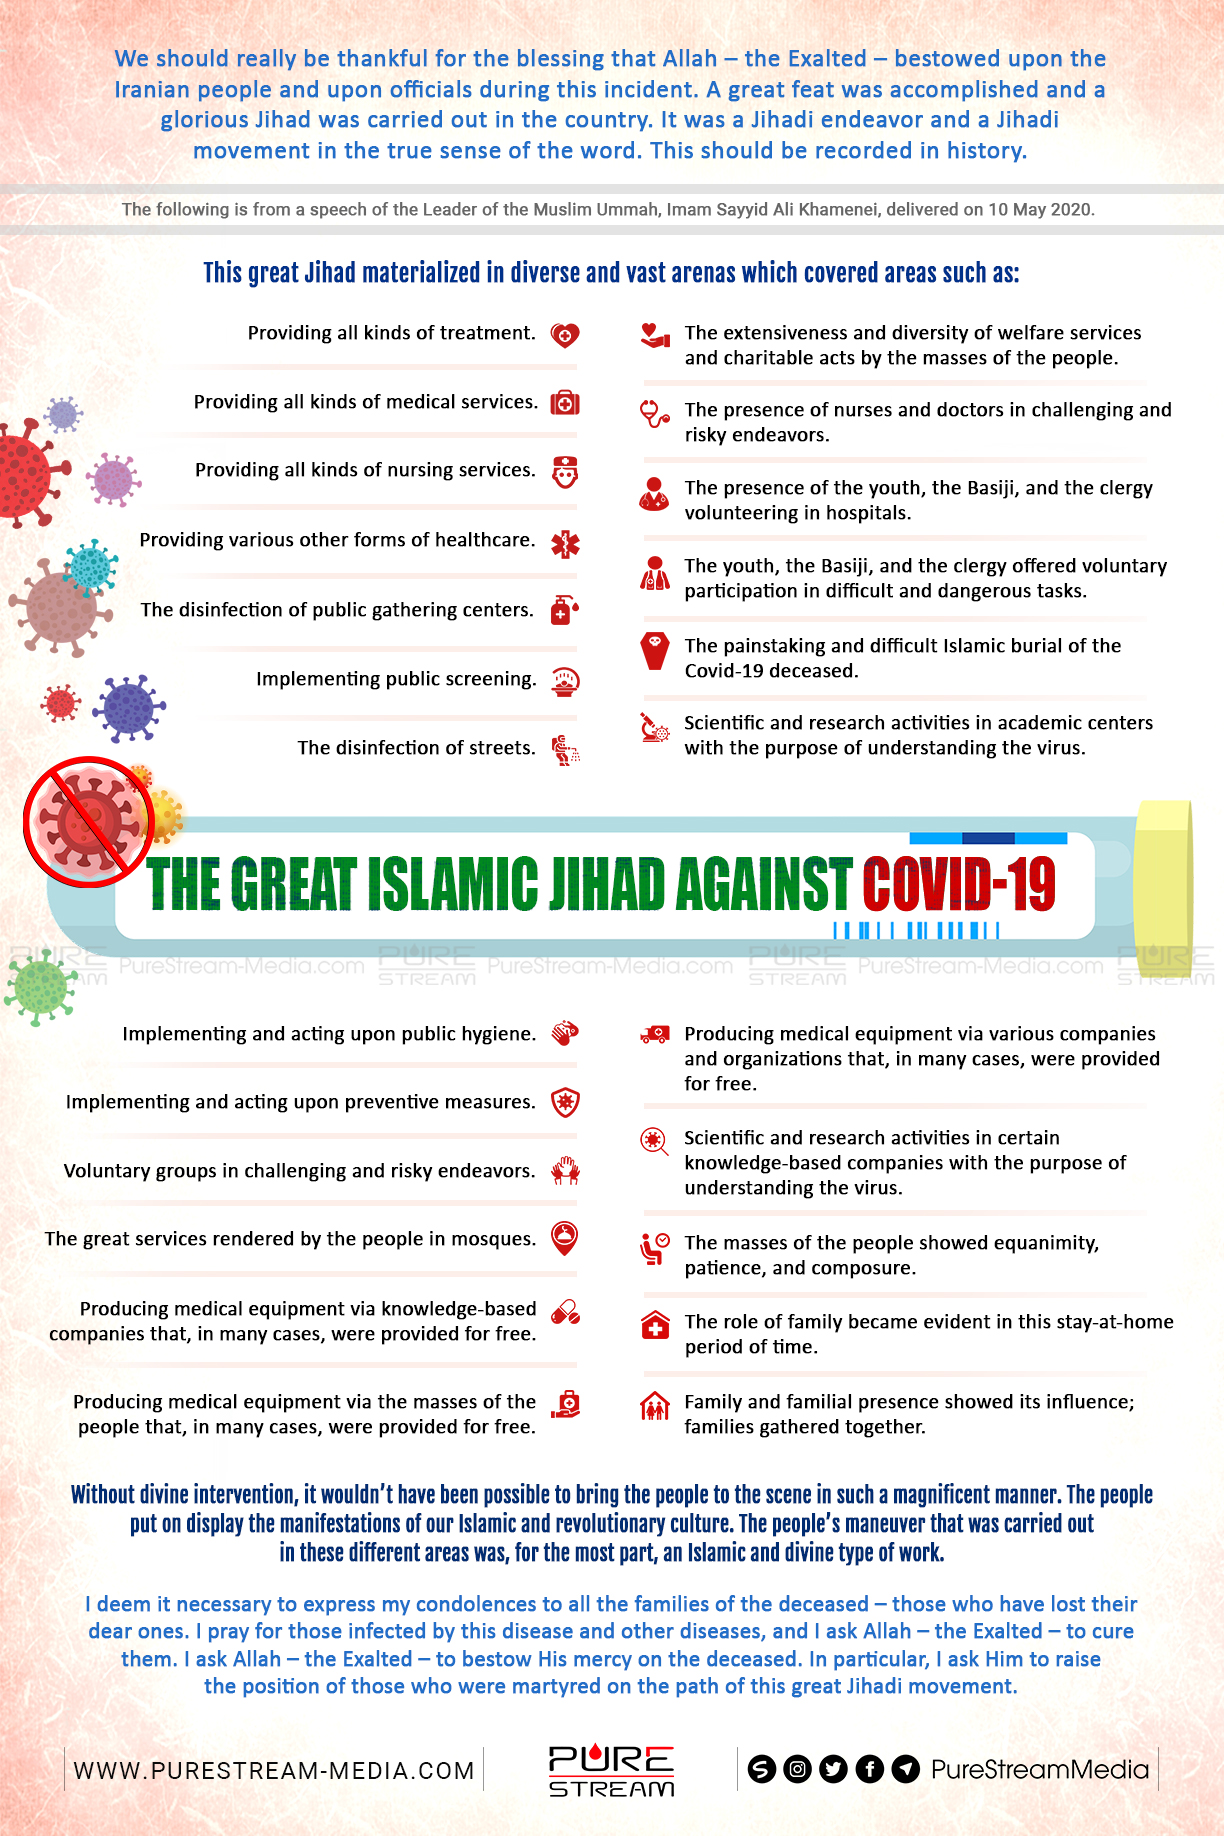 The Great Islamic Jihad Against Covid-19 | Infographic